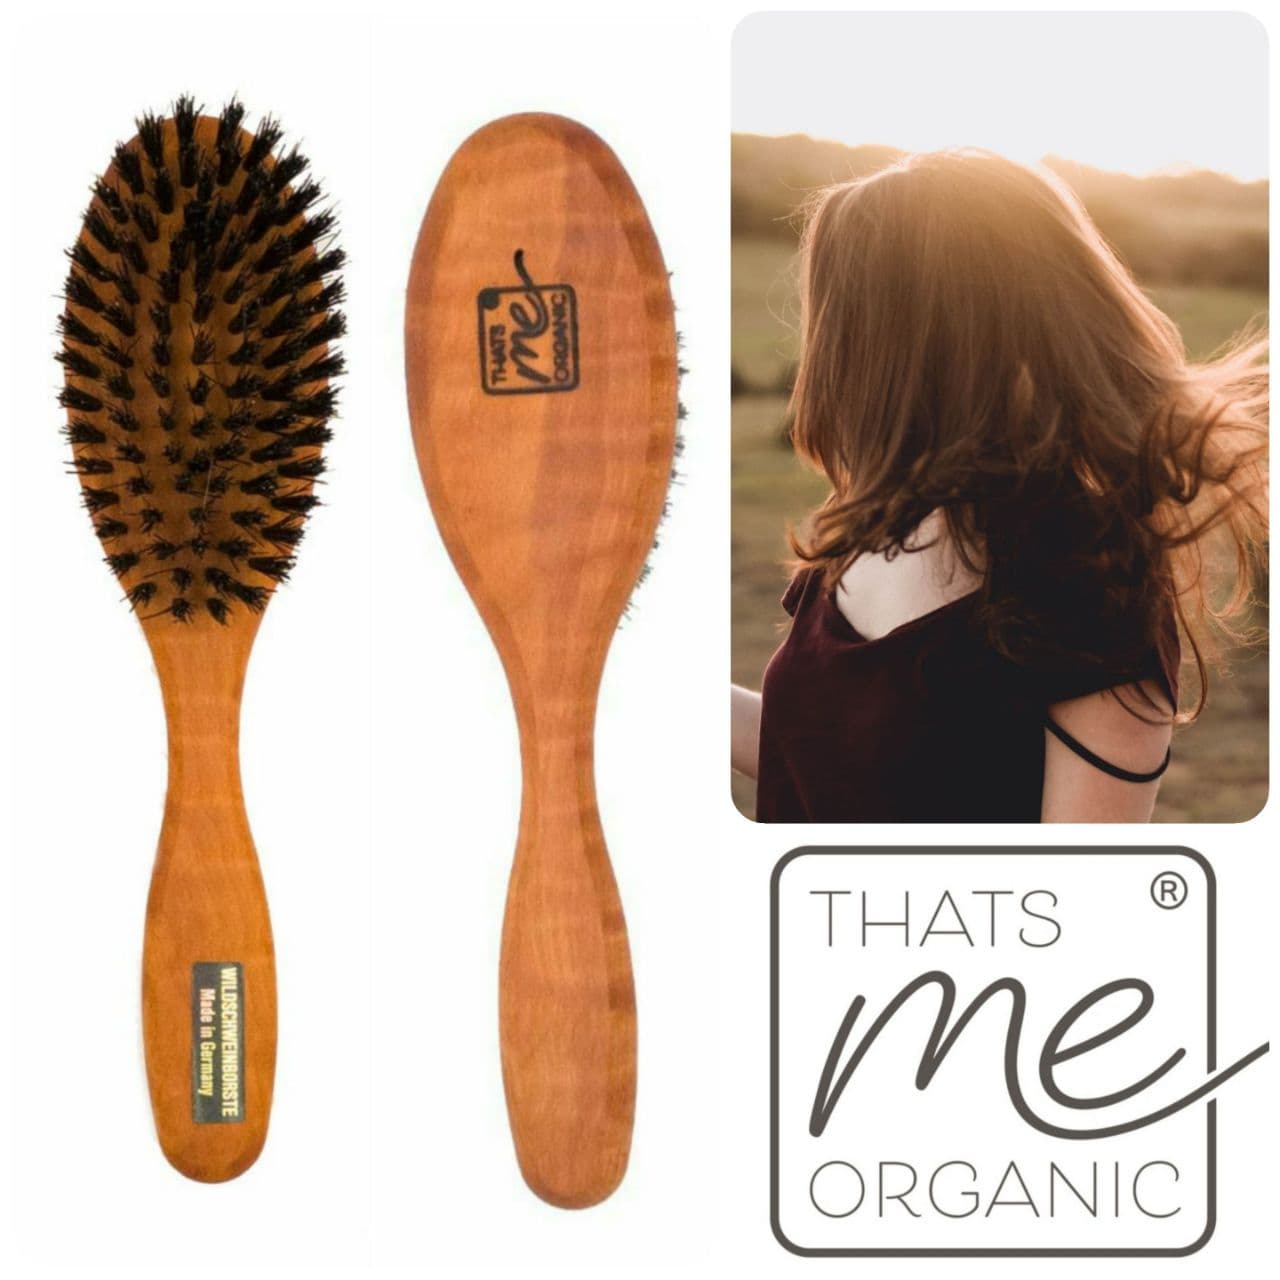 Professional hairbrush “The Slim One” made of pear wood and wild boar bristles